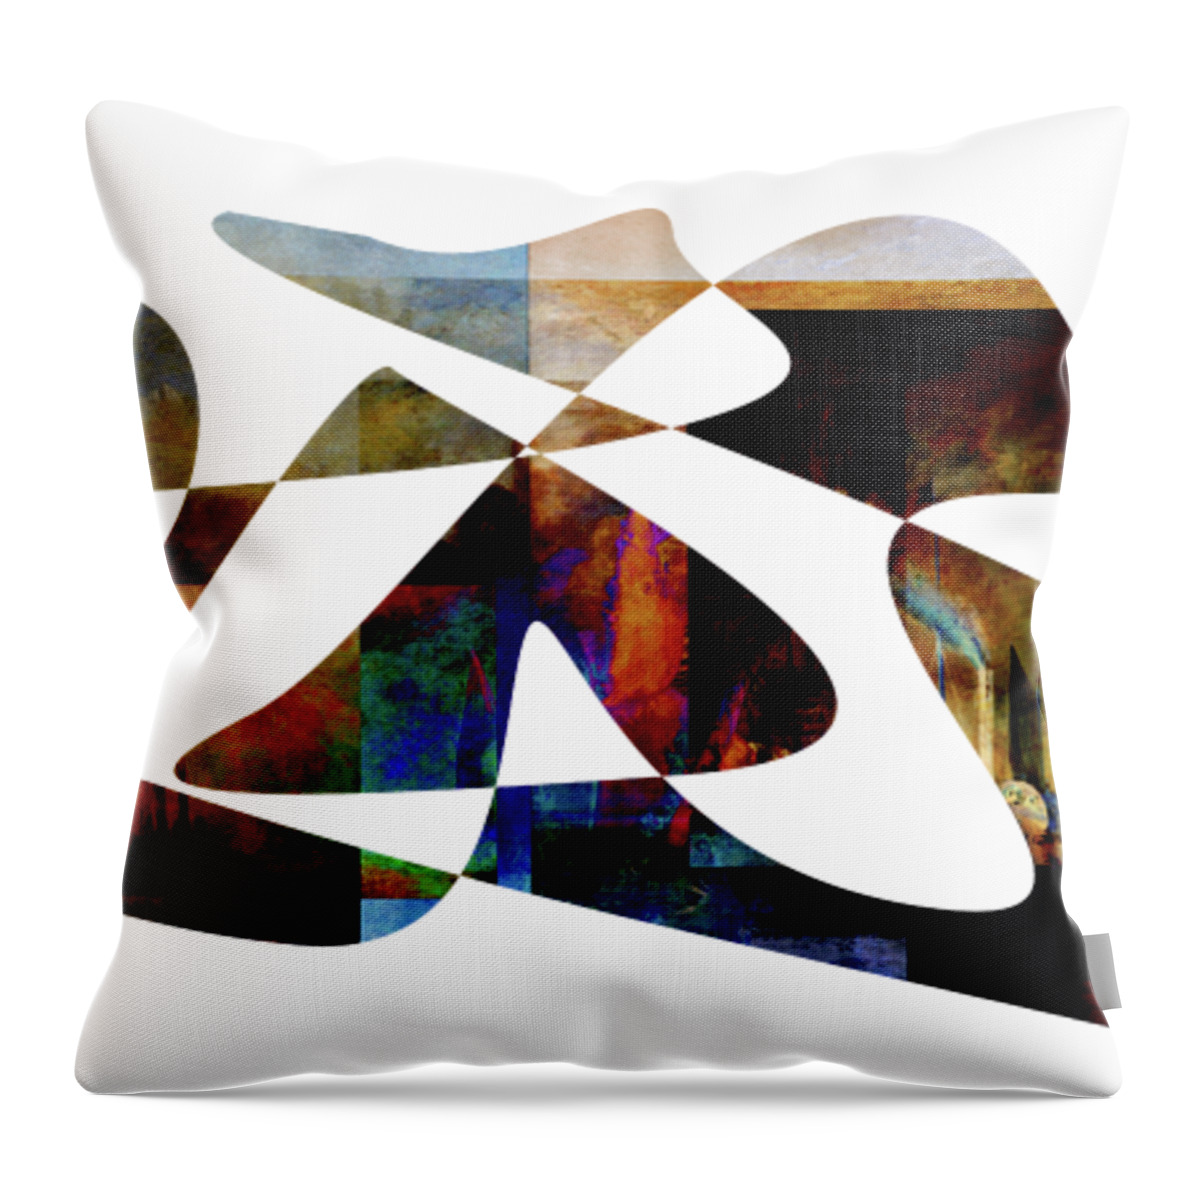 Abstract In The Living Room Throw Pillow featuring the digital art American Intellectual 12 by David Bridburg